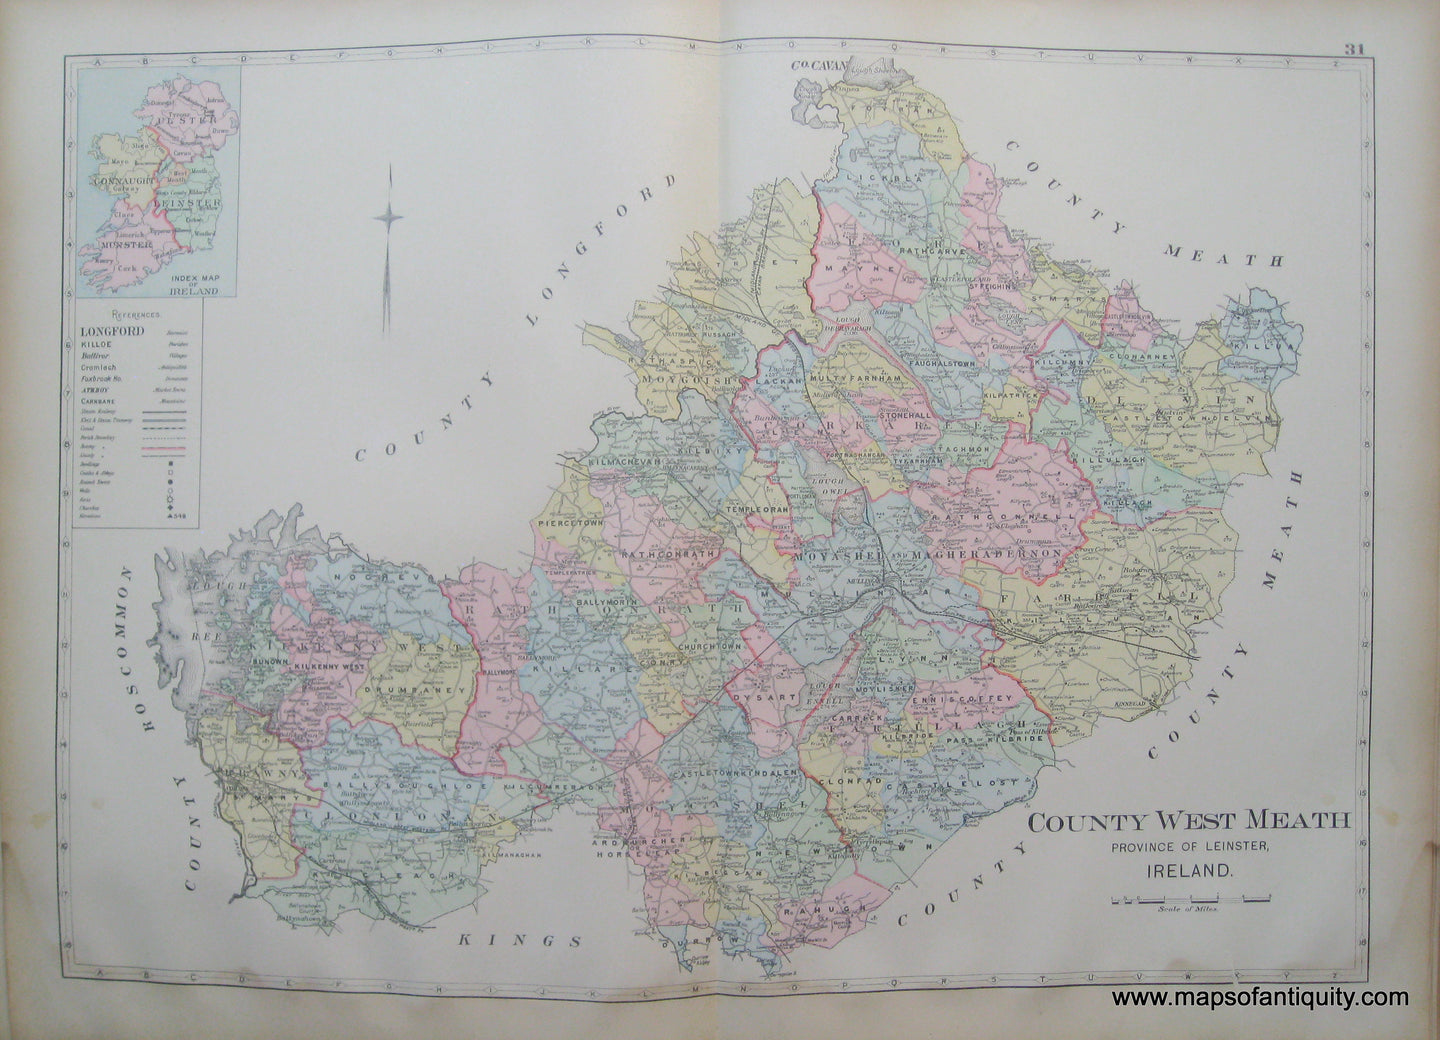 Antique-Map-County-West-Meath-Province-of-Leinster-Ireland.-Richards-1901-Maps-Of-Antiquity